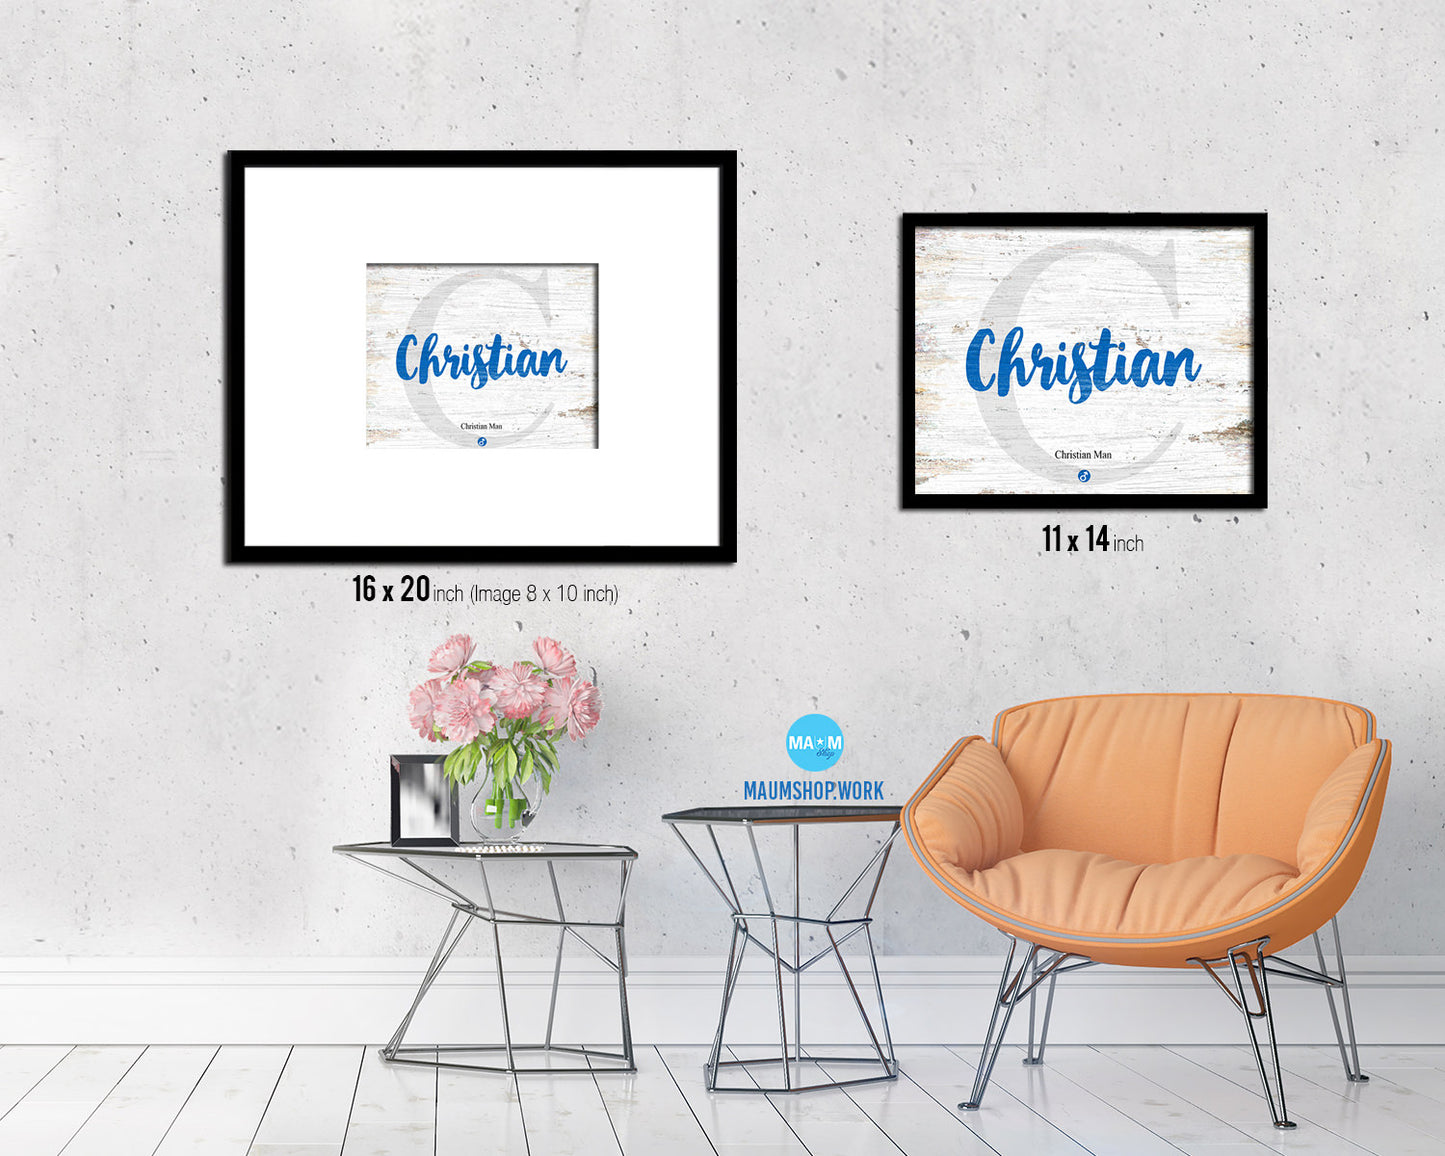 Christian Personalized Biblical Name Plate Art Framed Print Kids Baby Room Wall Decor Gifts